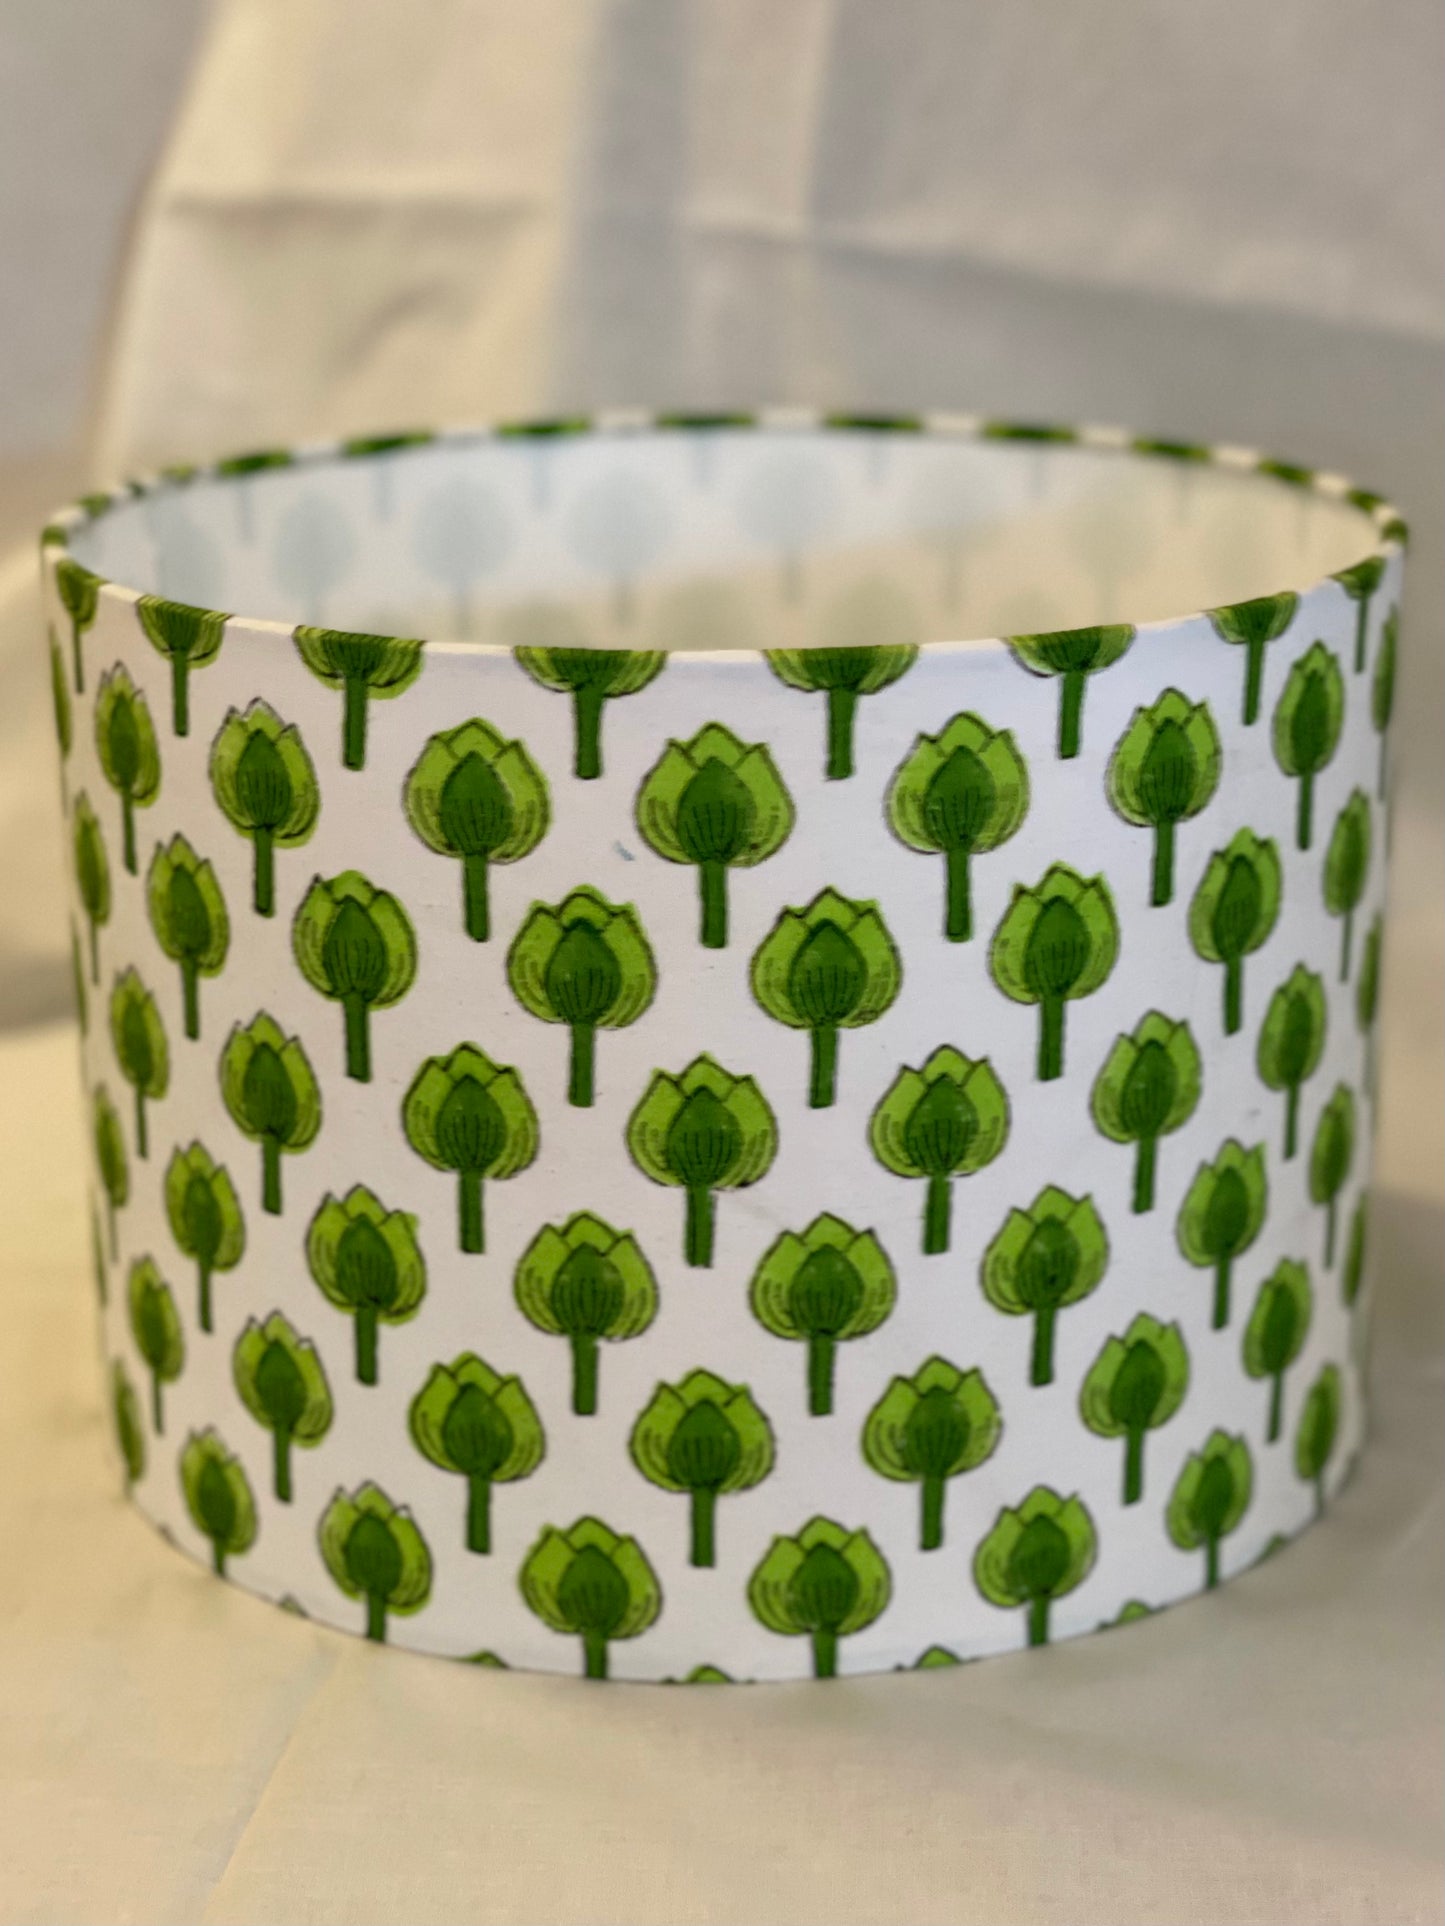 10 inch Drum Lampshade. Indian Block Print. Shades of Apple Green on White.